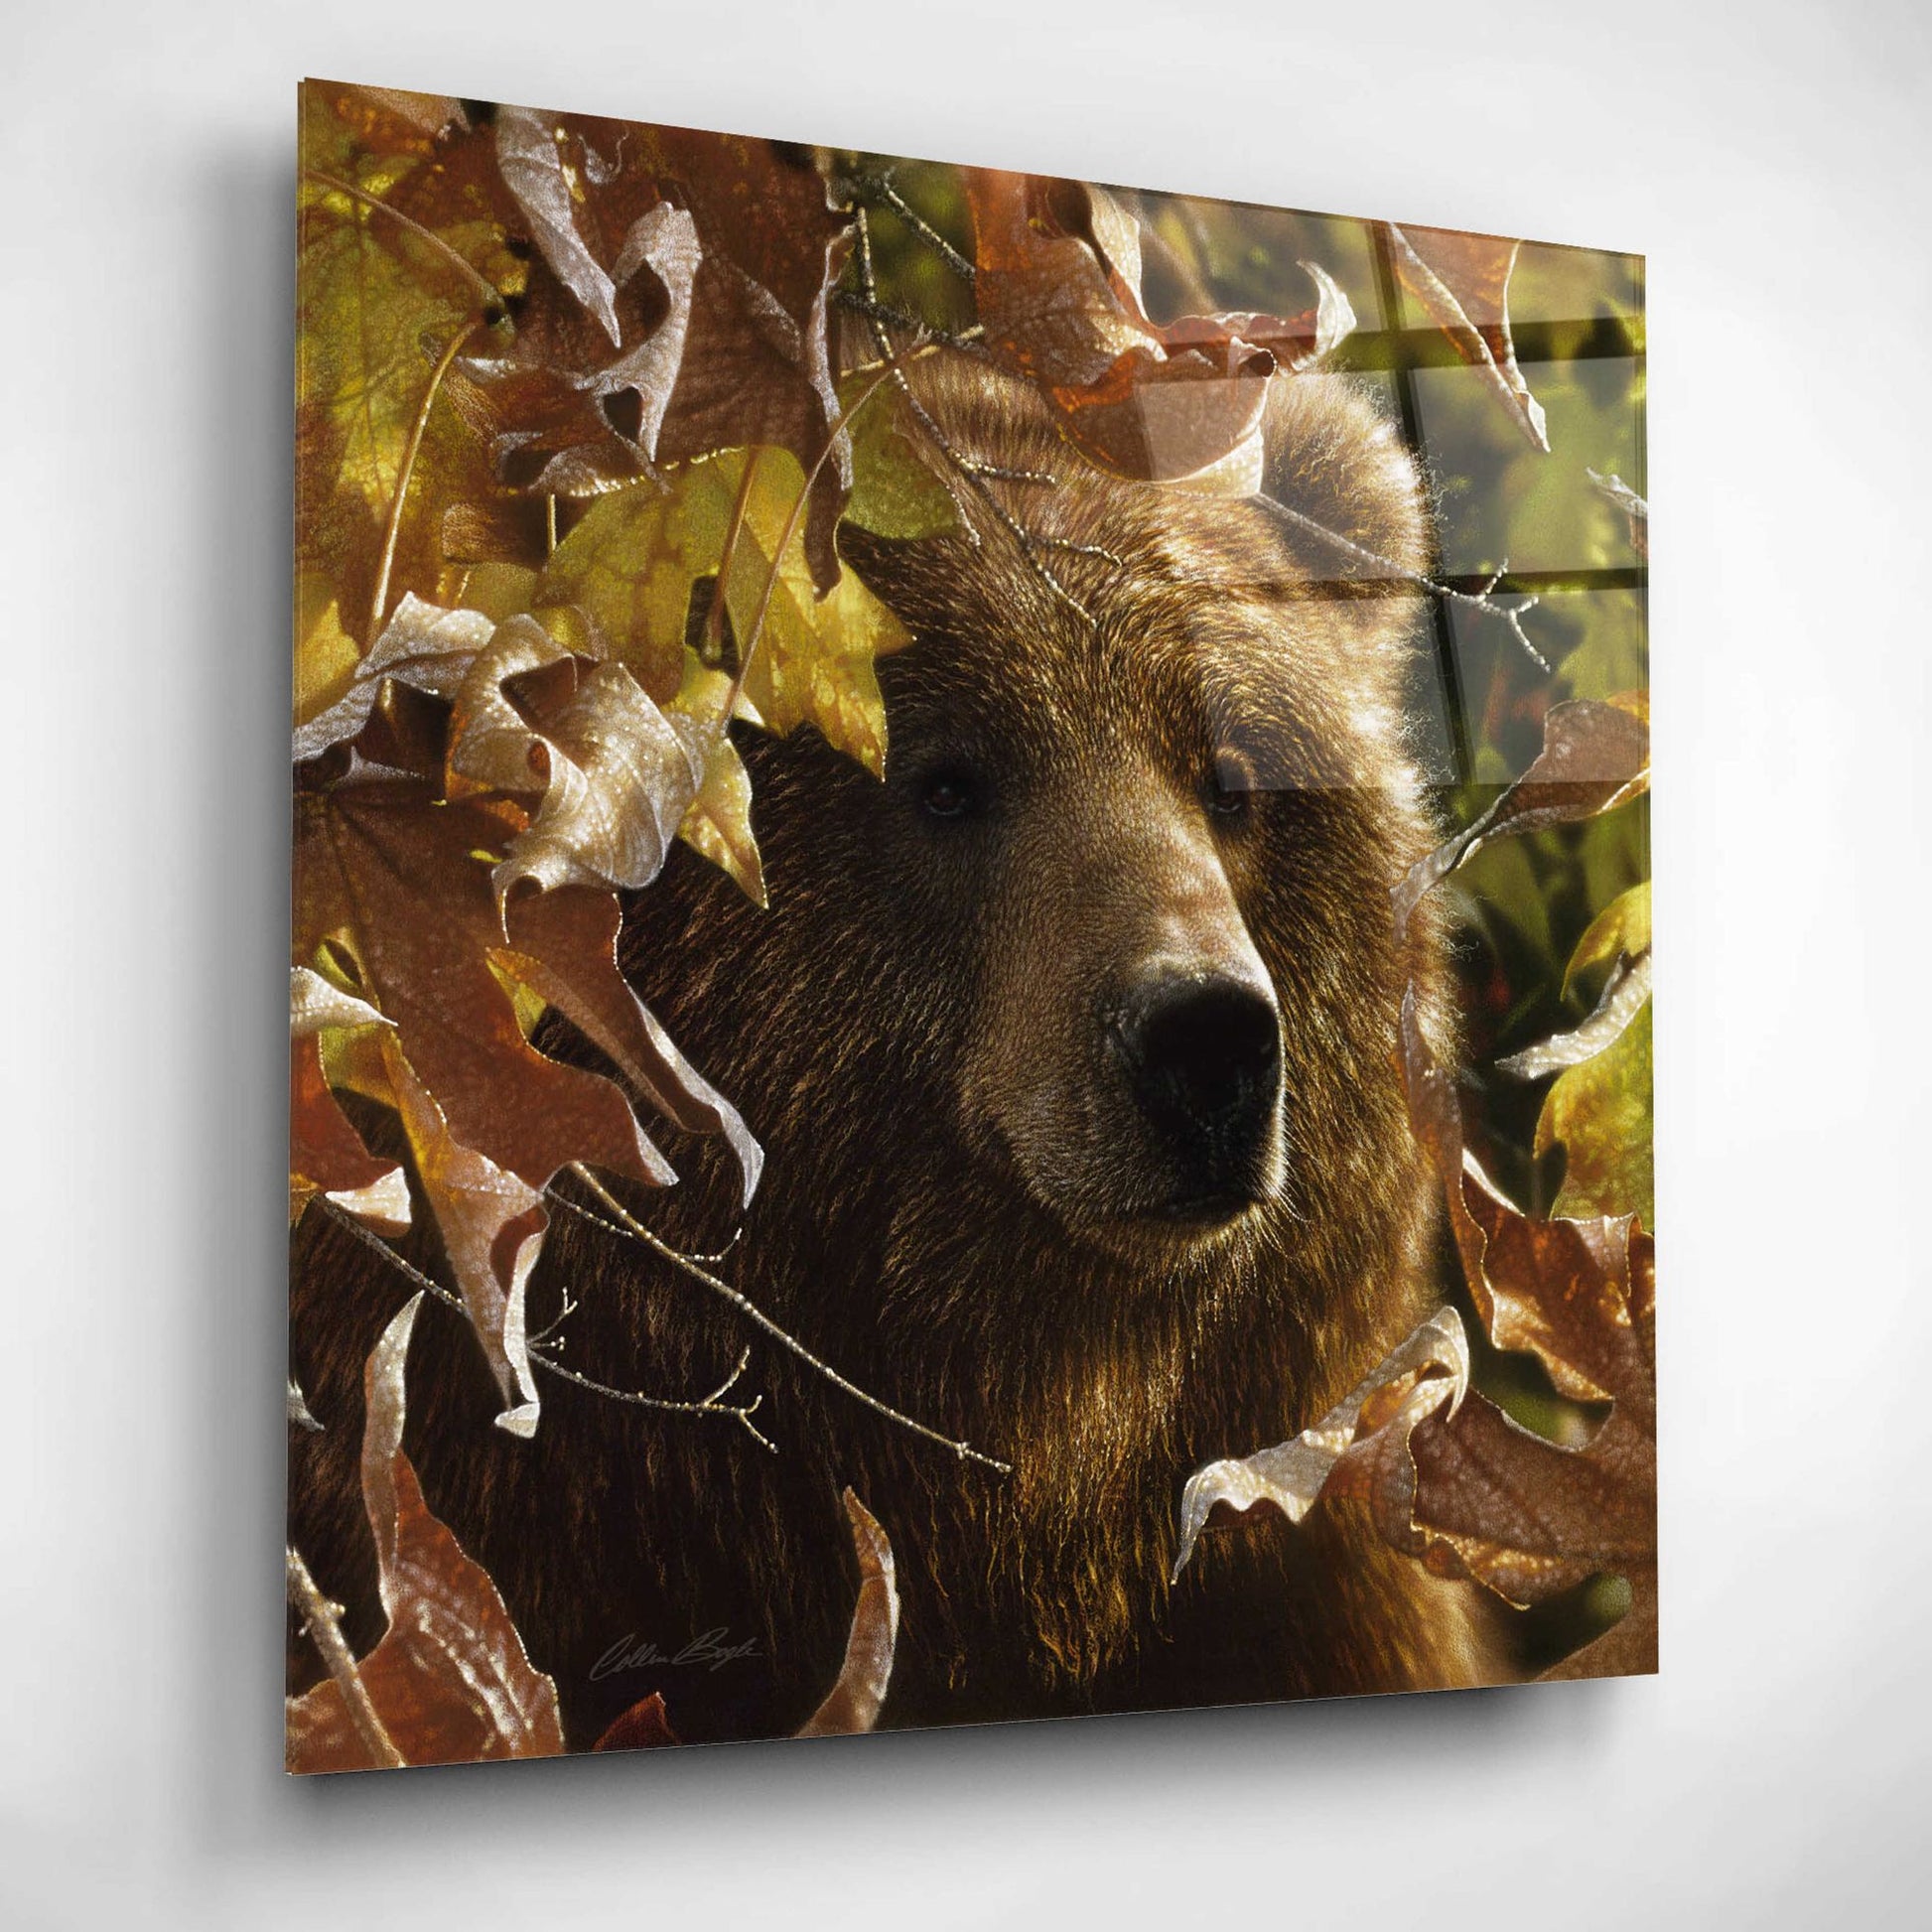 Epic Art 'Legend Of The Fall' by Collin Bogle Acrylic Glass Wall Art,12x12